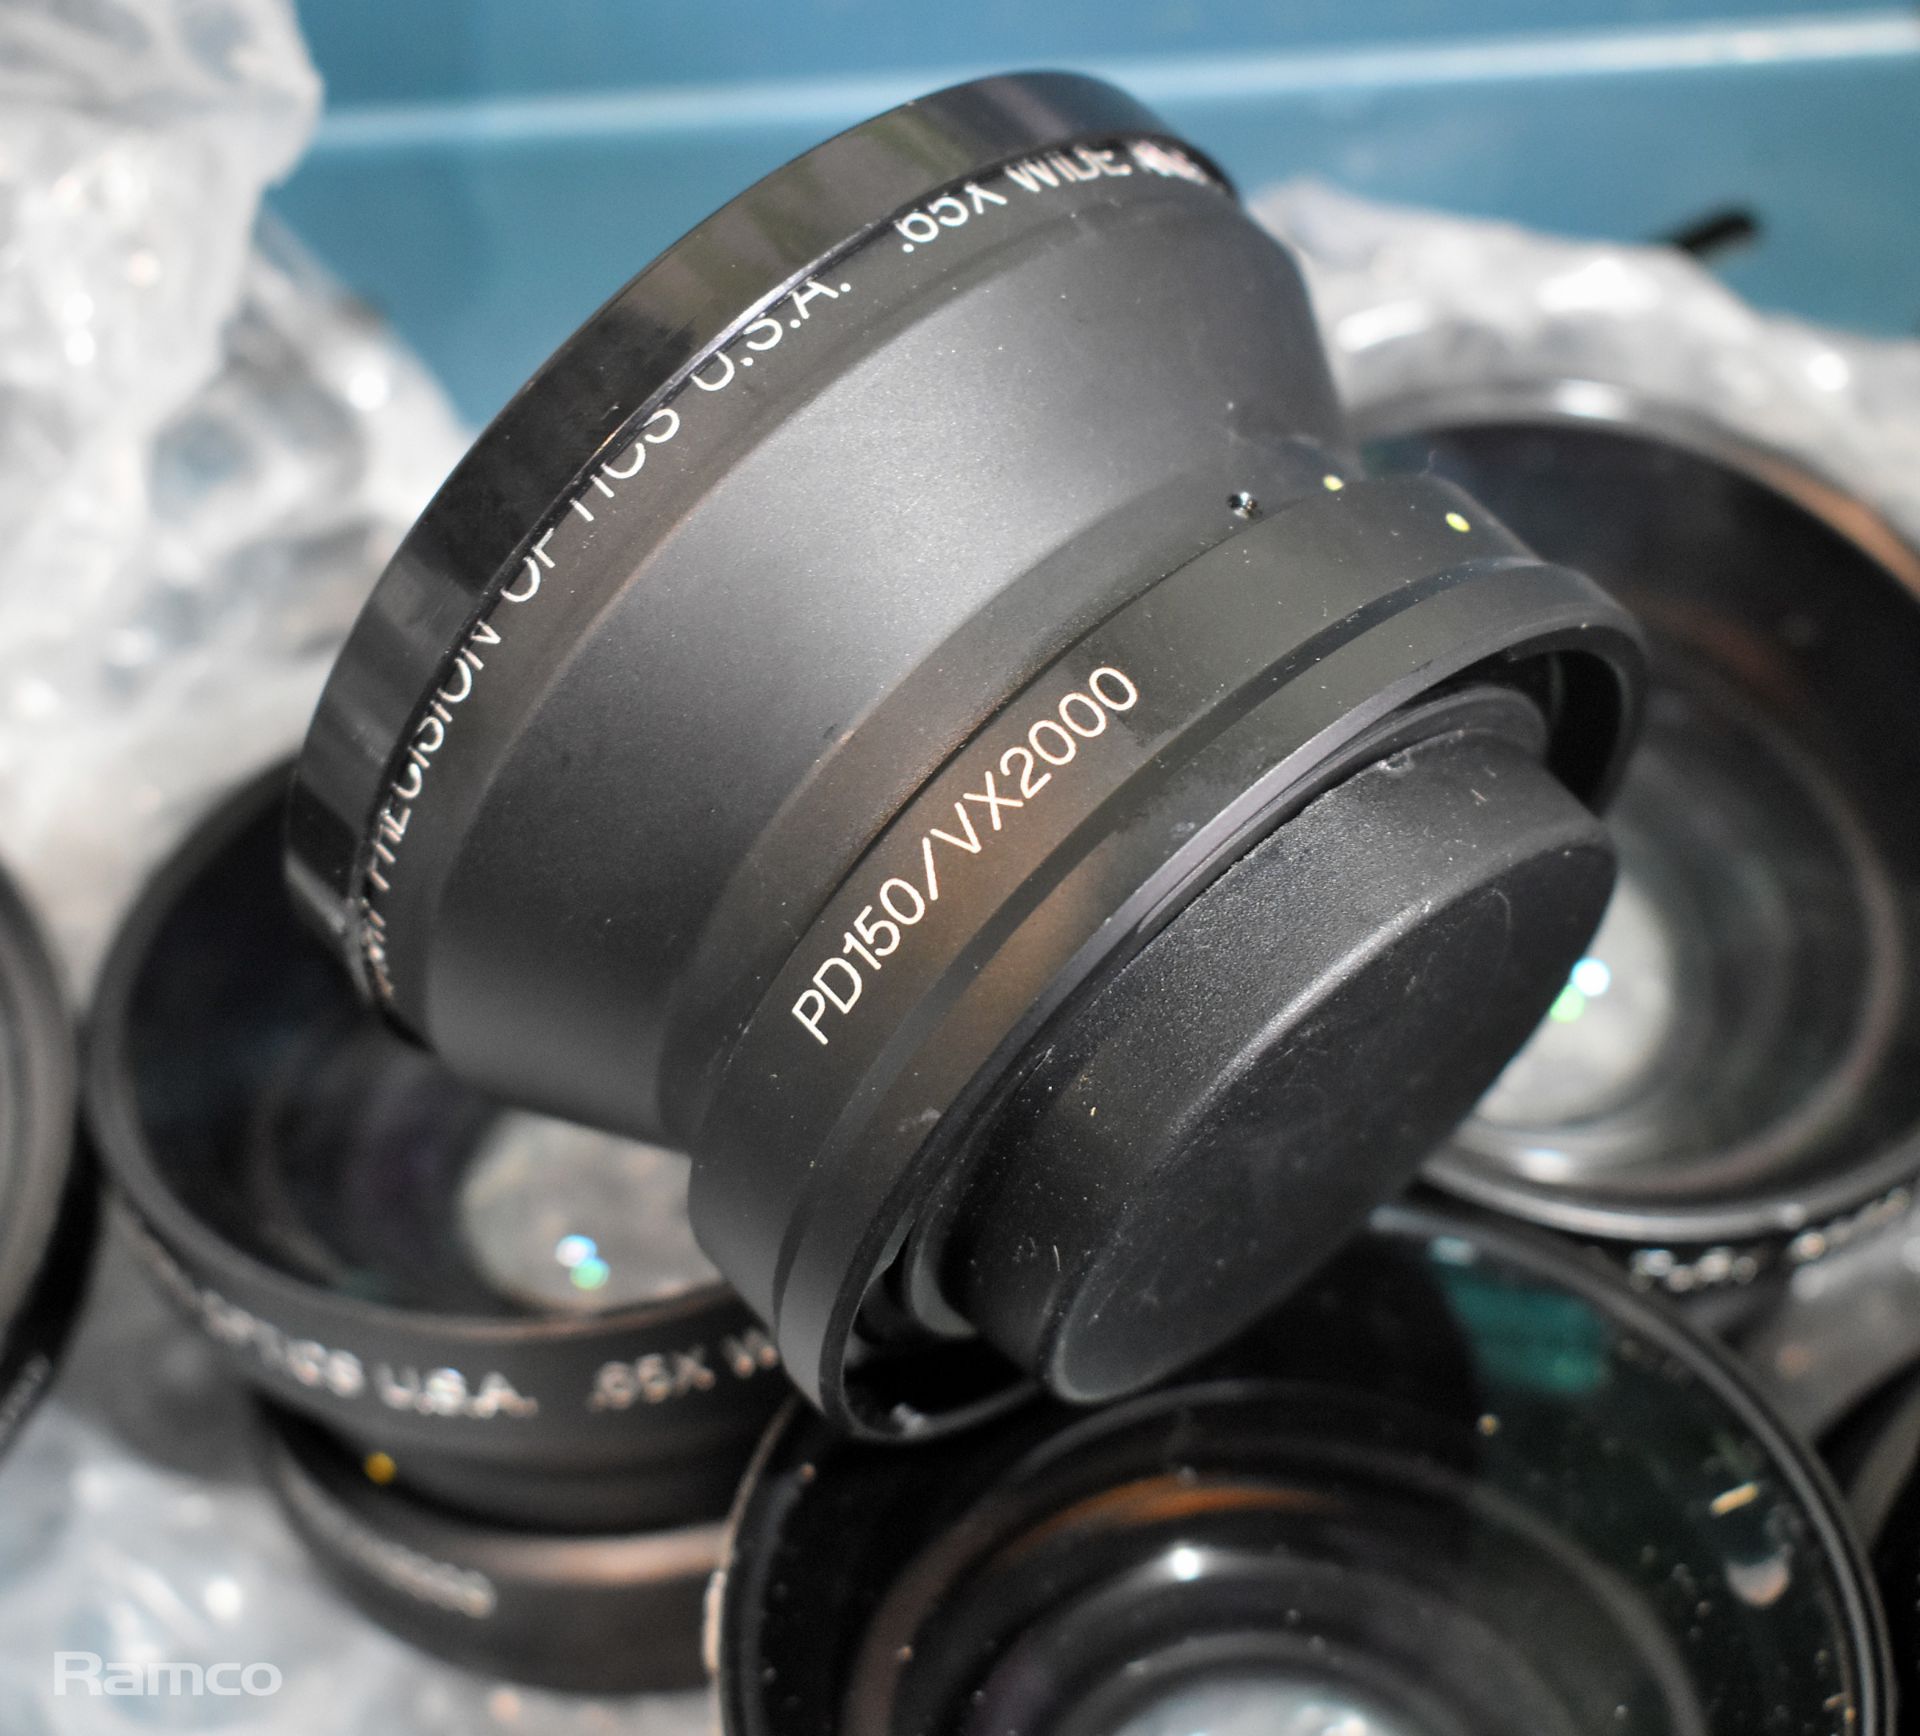 Projector and lens spares - 2x LMP49 projection lamp - Century Precision Optics and Sony lenses - Image 3 of 4